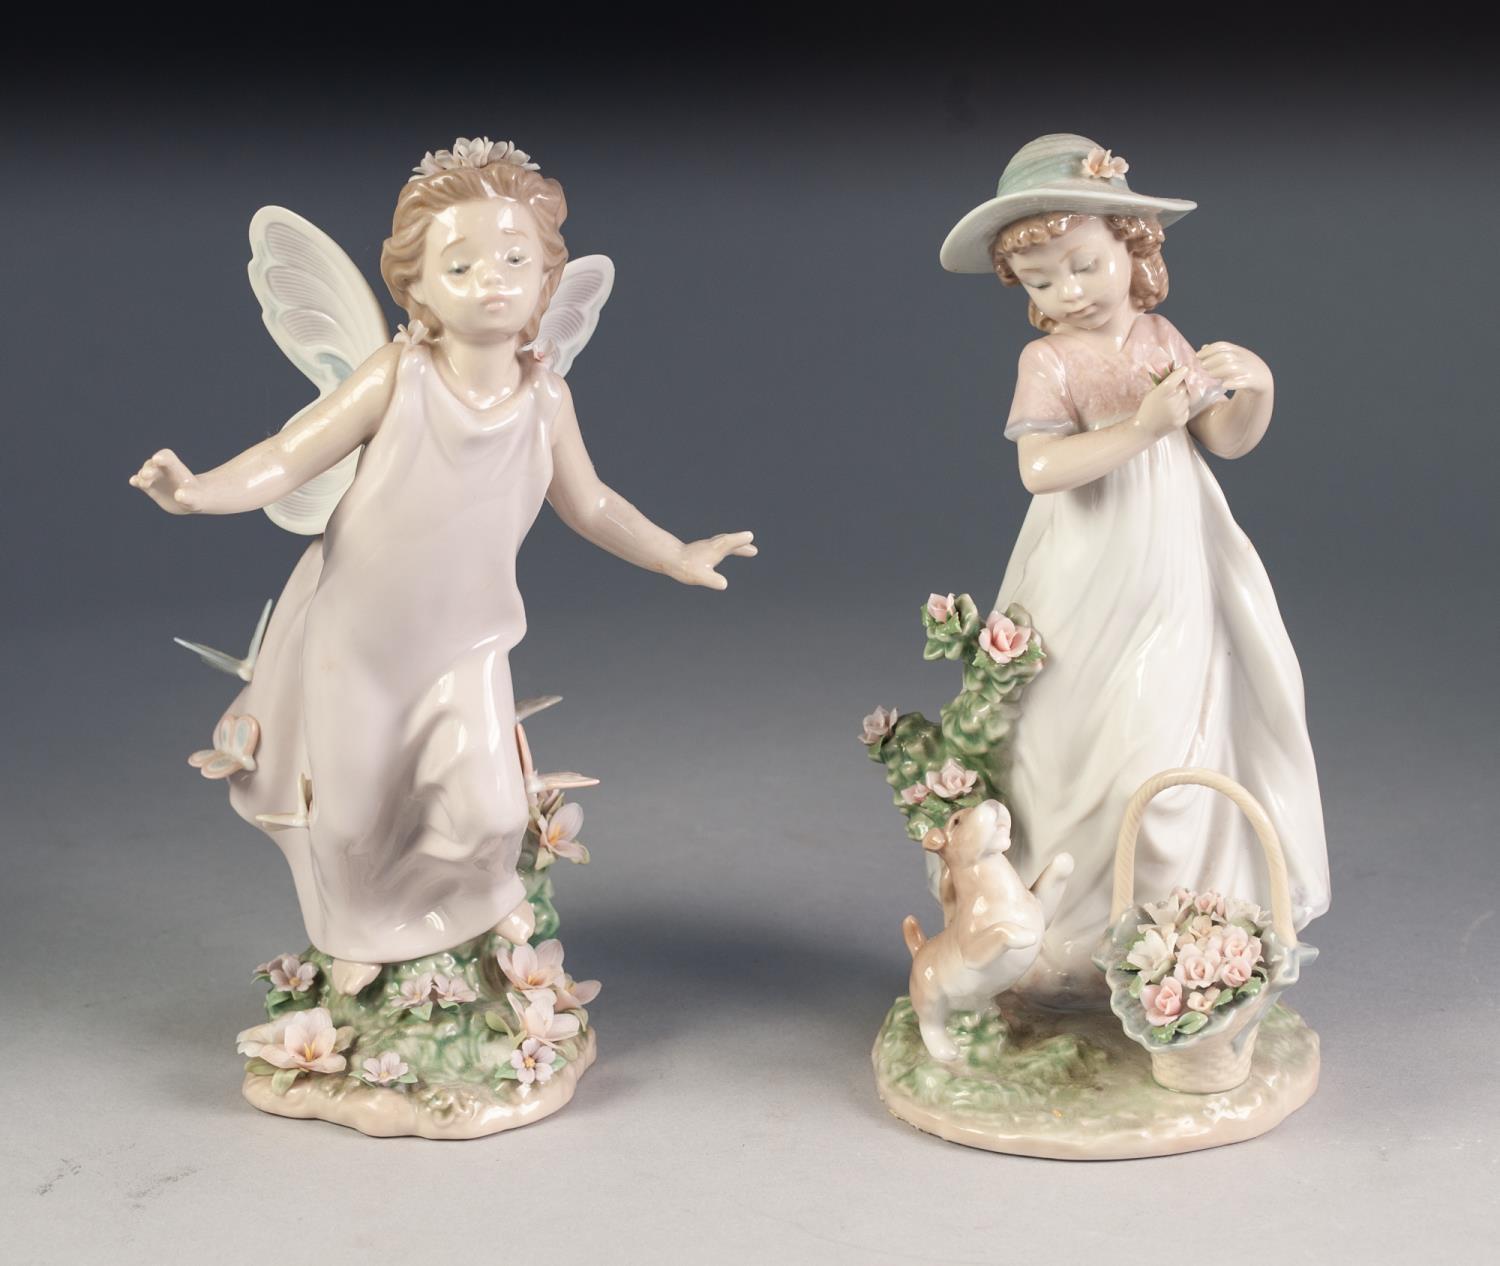 TWO LLADRO PORCELAIN FIGURES, one modelled as a fairy with arms outstretched (6375), the other as